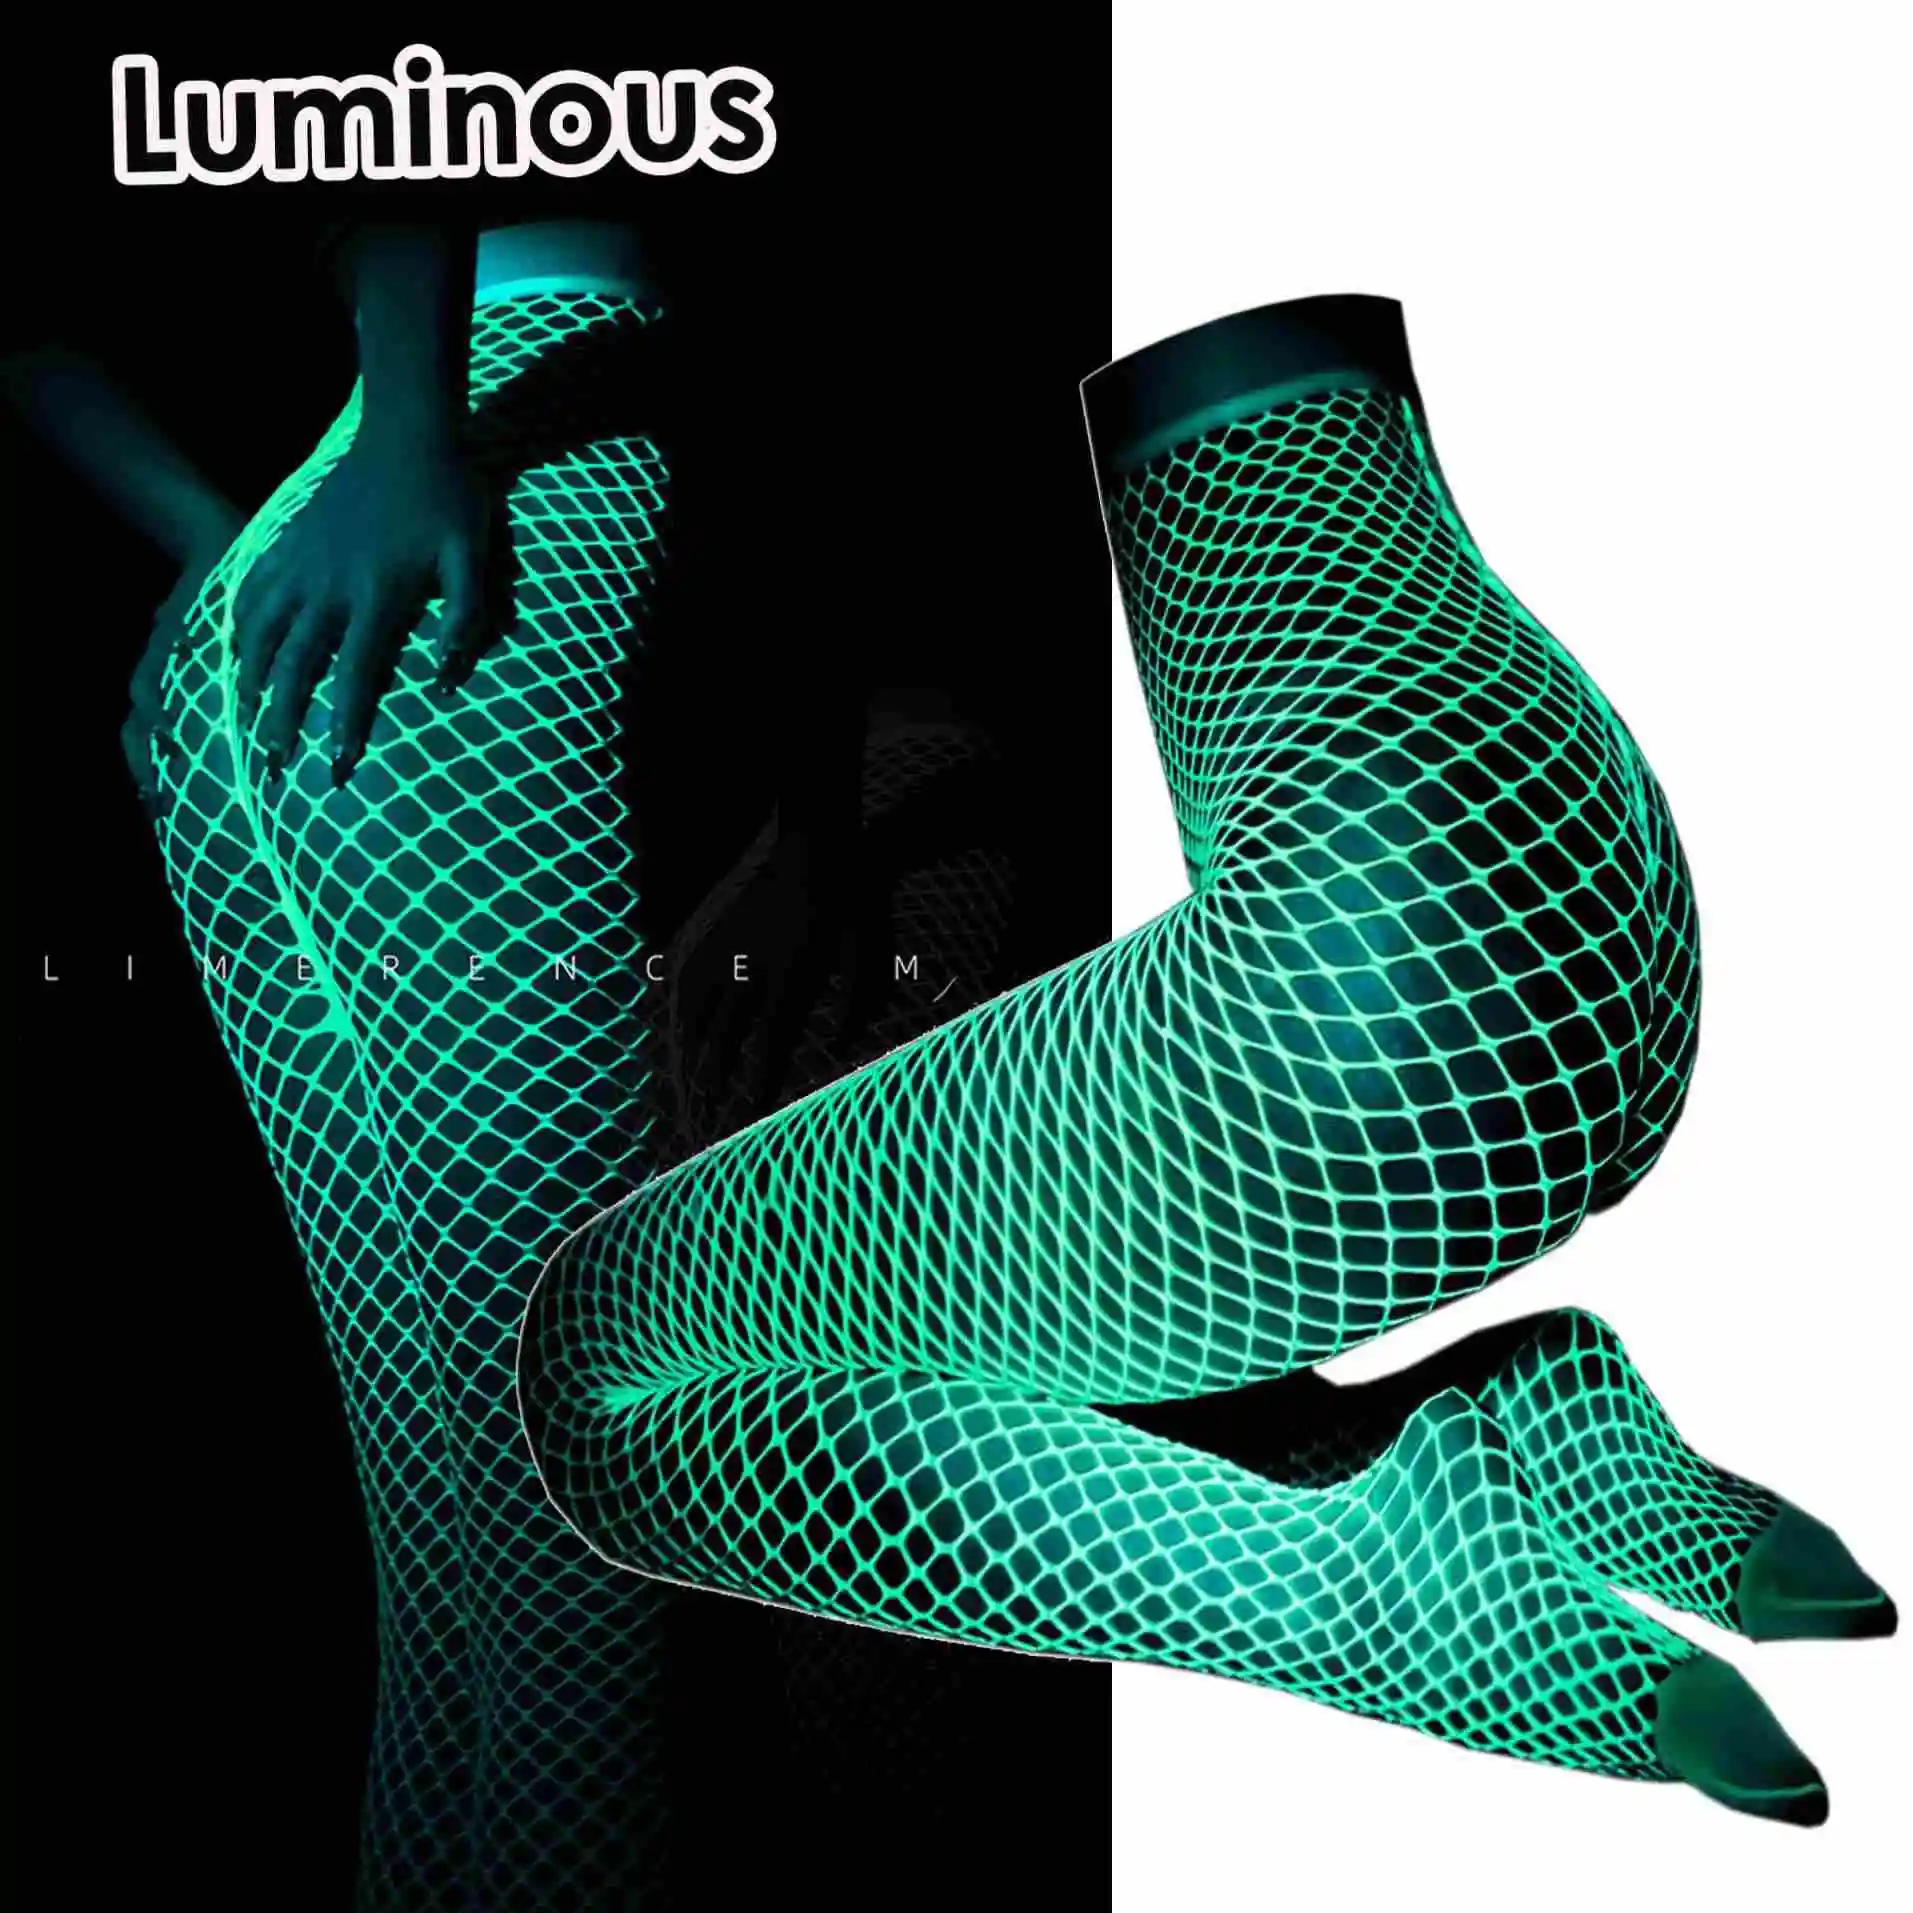 Glow in the dark Luminous fiishnet socks stocking sexy party pantyhose tights for woman (1600590594389)